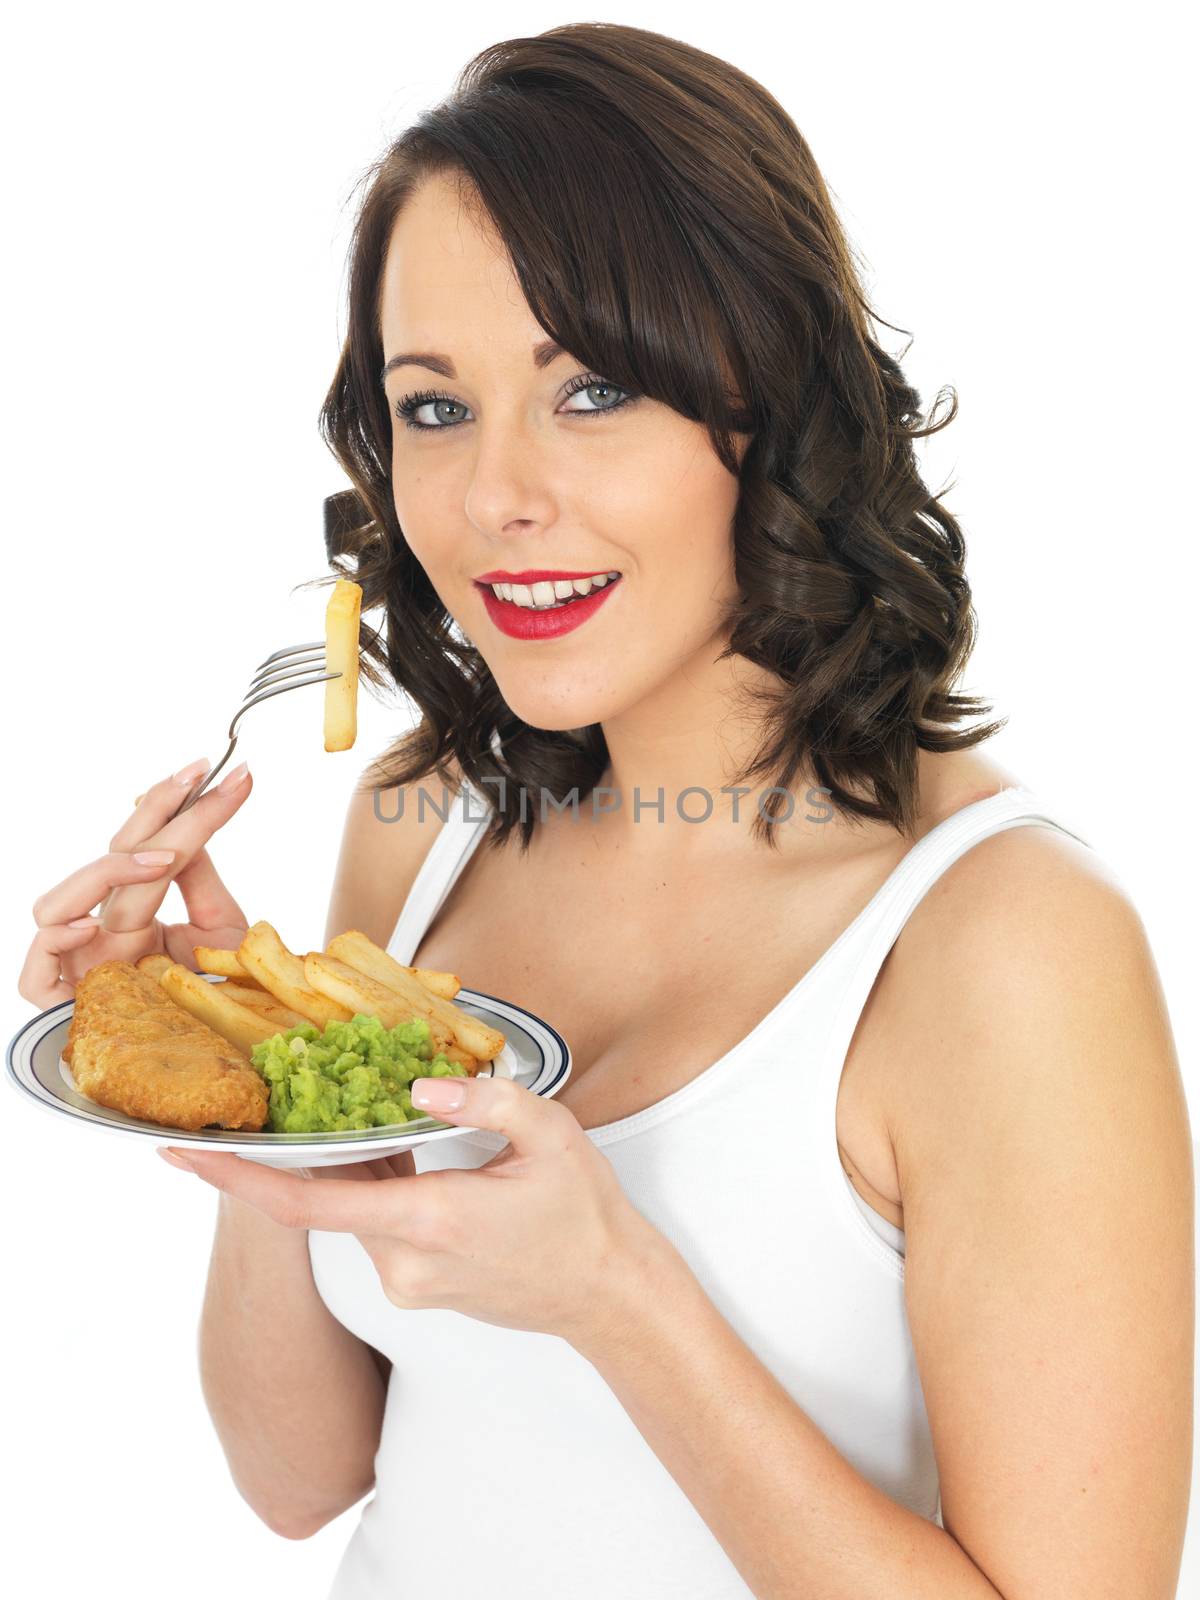 Young Woman Eating Fish and Chips by Whiteboxmedia